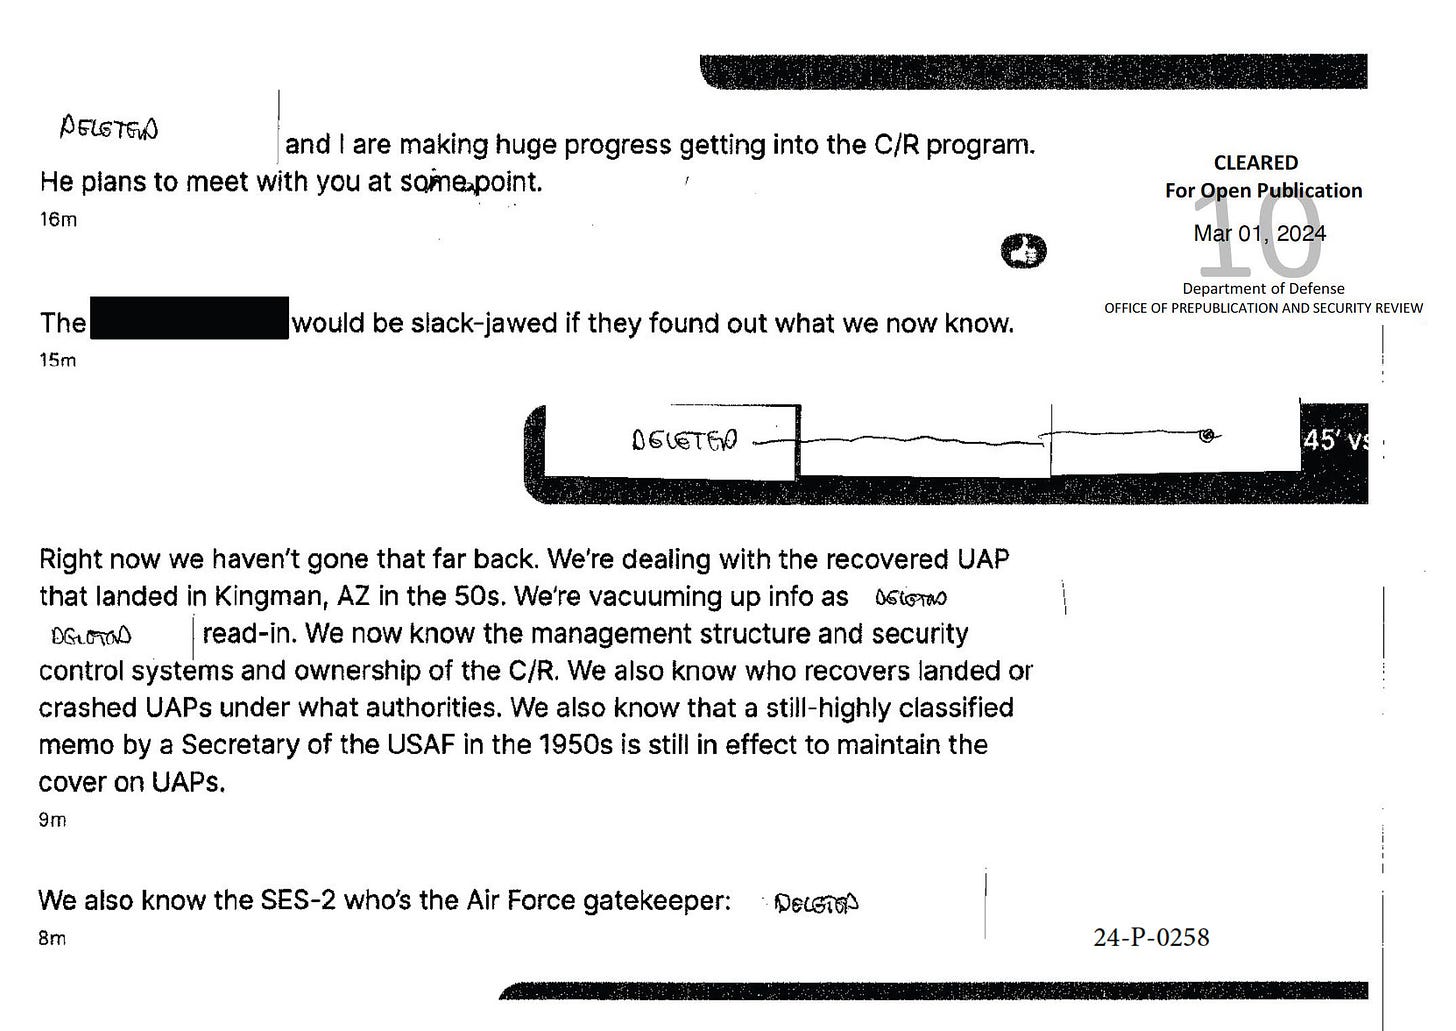 Scan of redacted message exchange, cleared for publication by DOPSR.